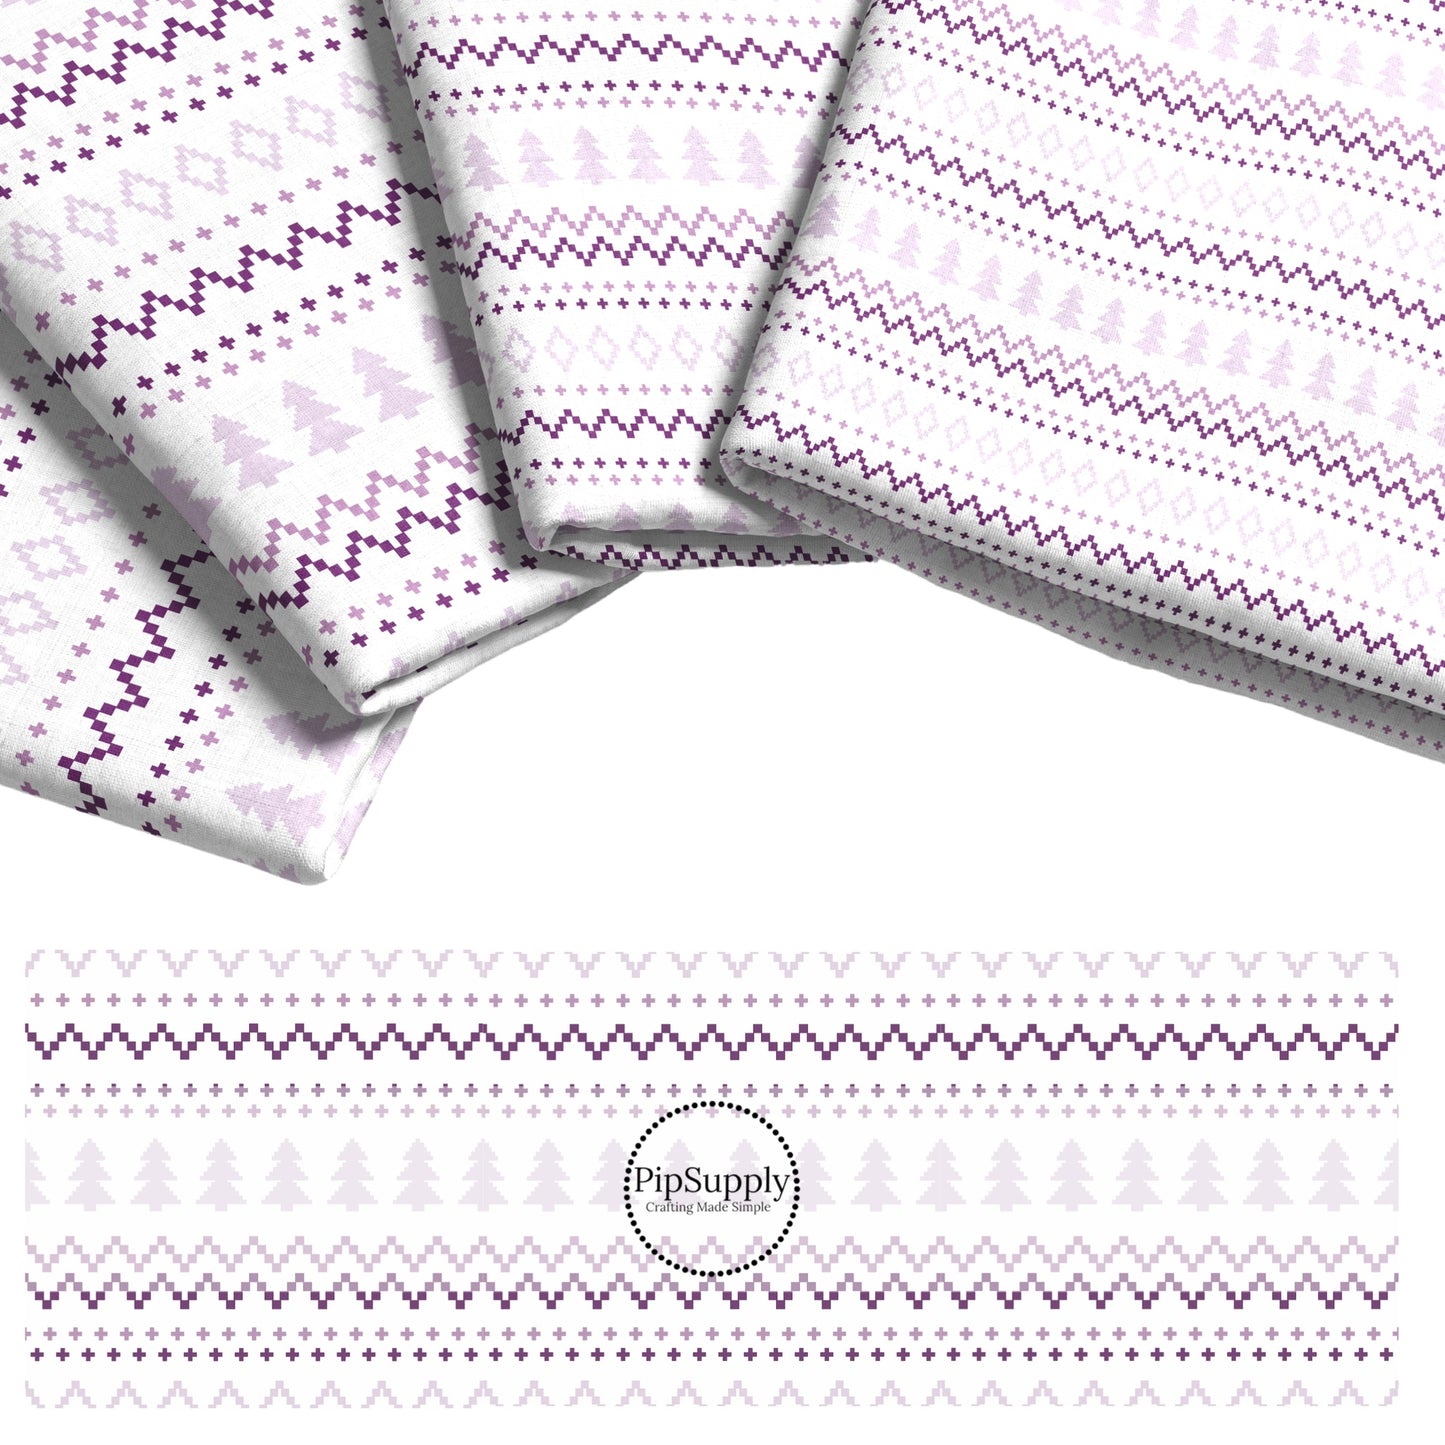 White fabric stack with purple fair isle sweater